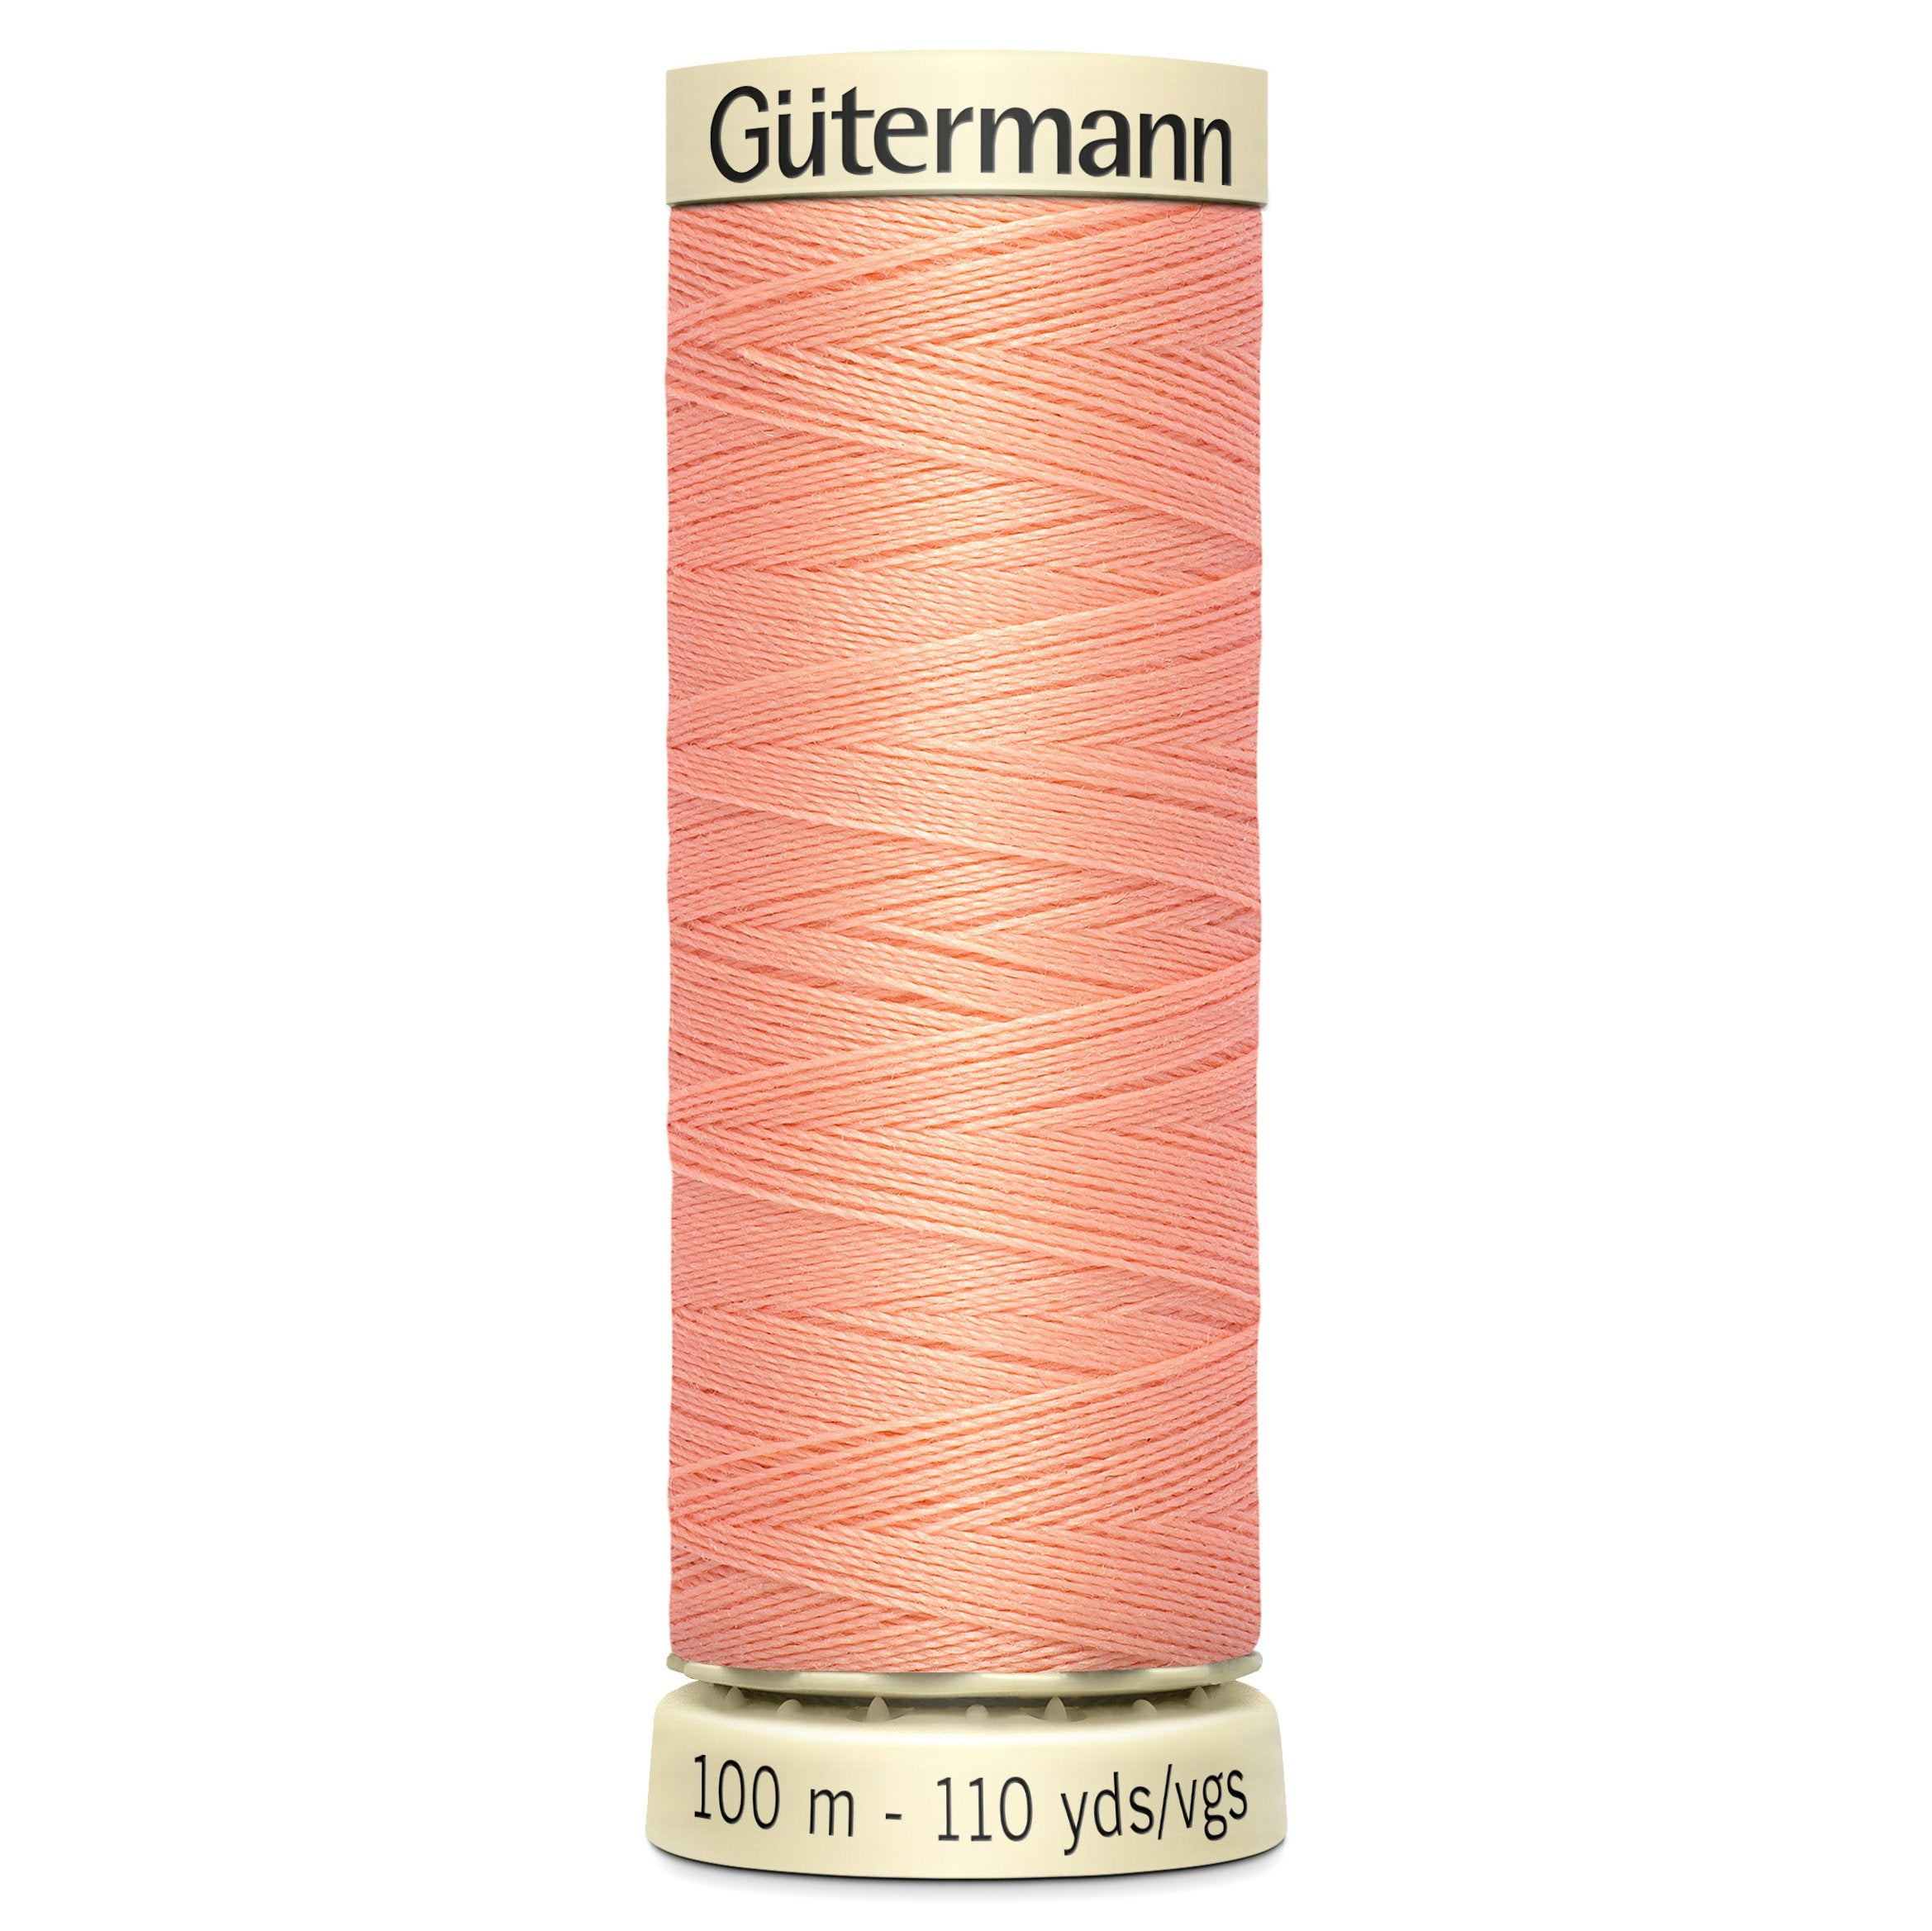 Gutermann Sew All Thread colour 586 Peach from Jaycotts Sewing Supplies